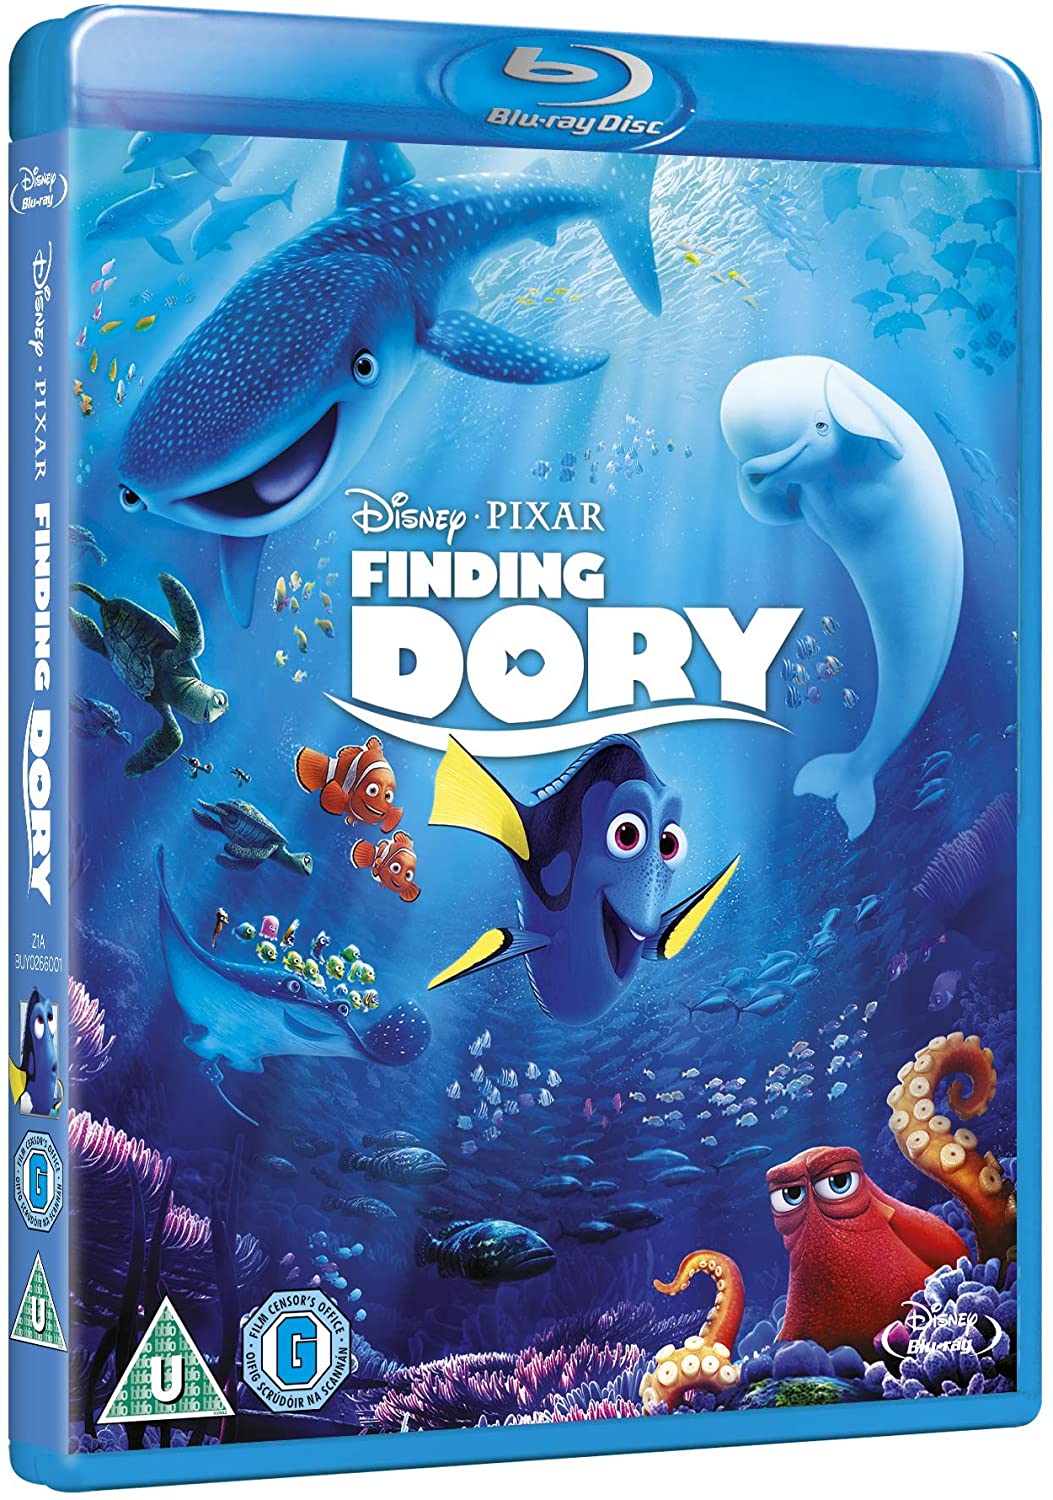 Trouver Dory [Blu-ray] [2017]